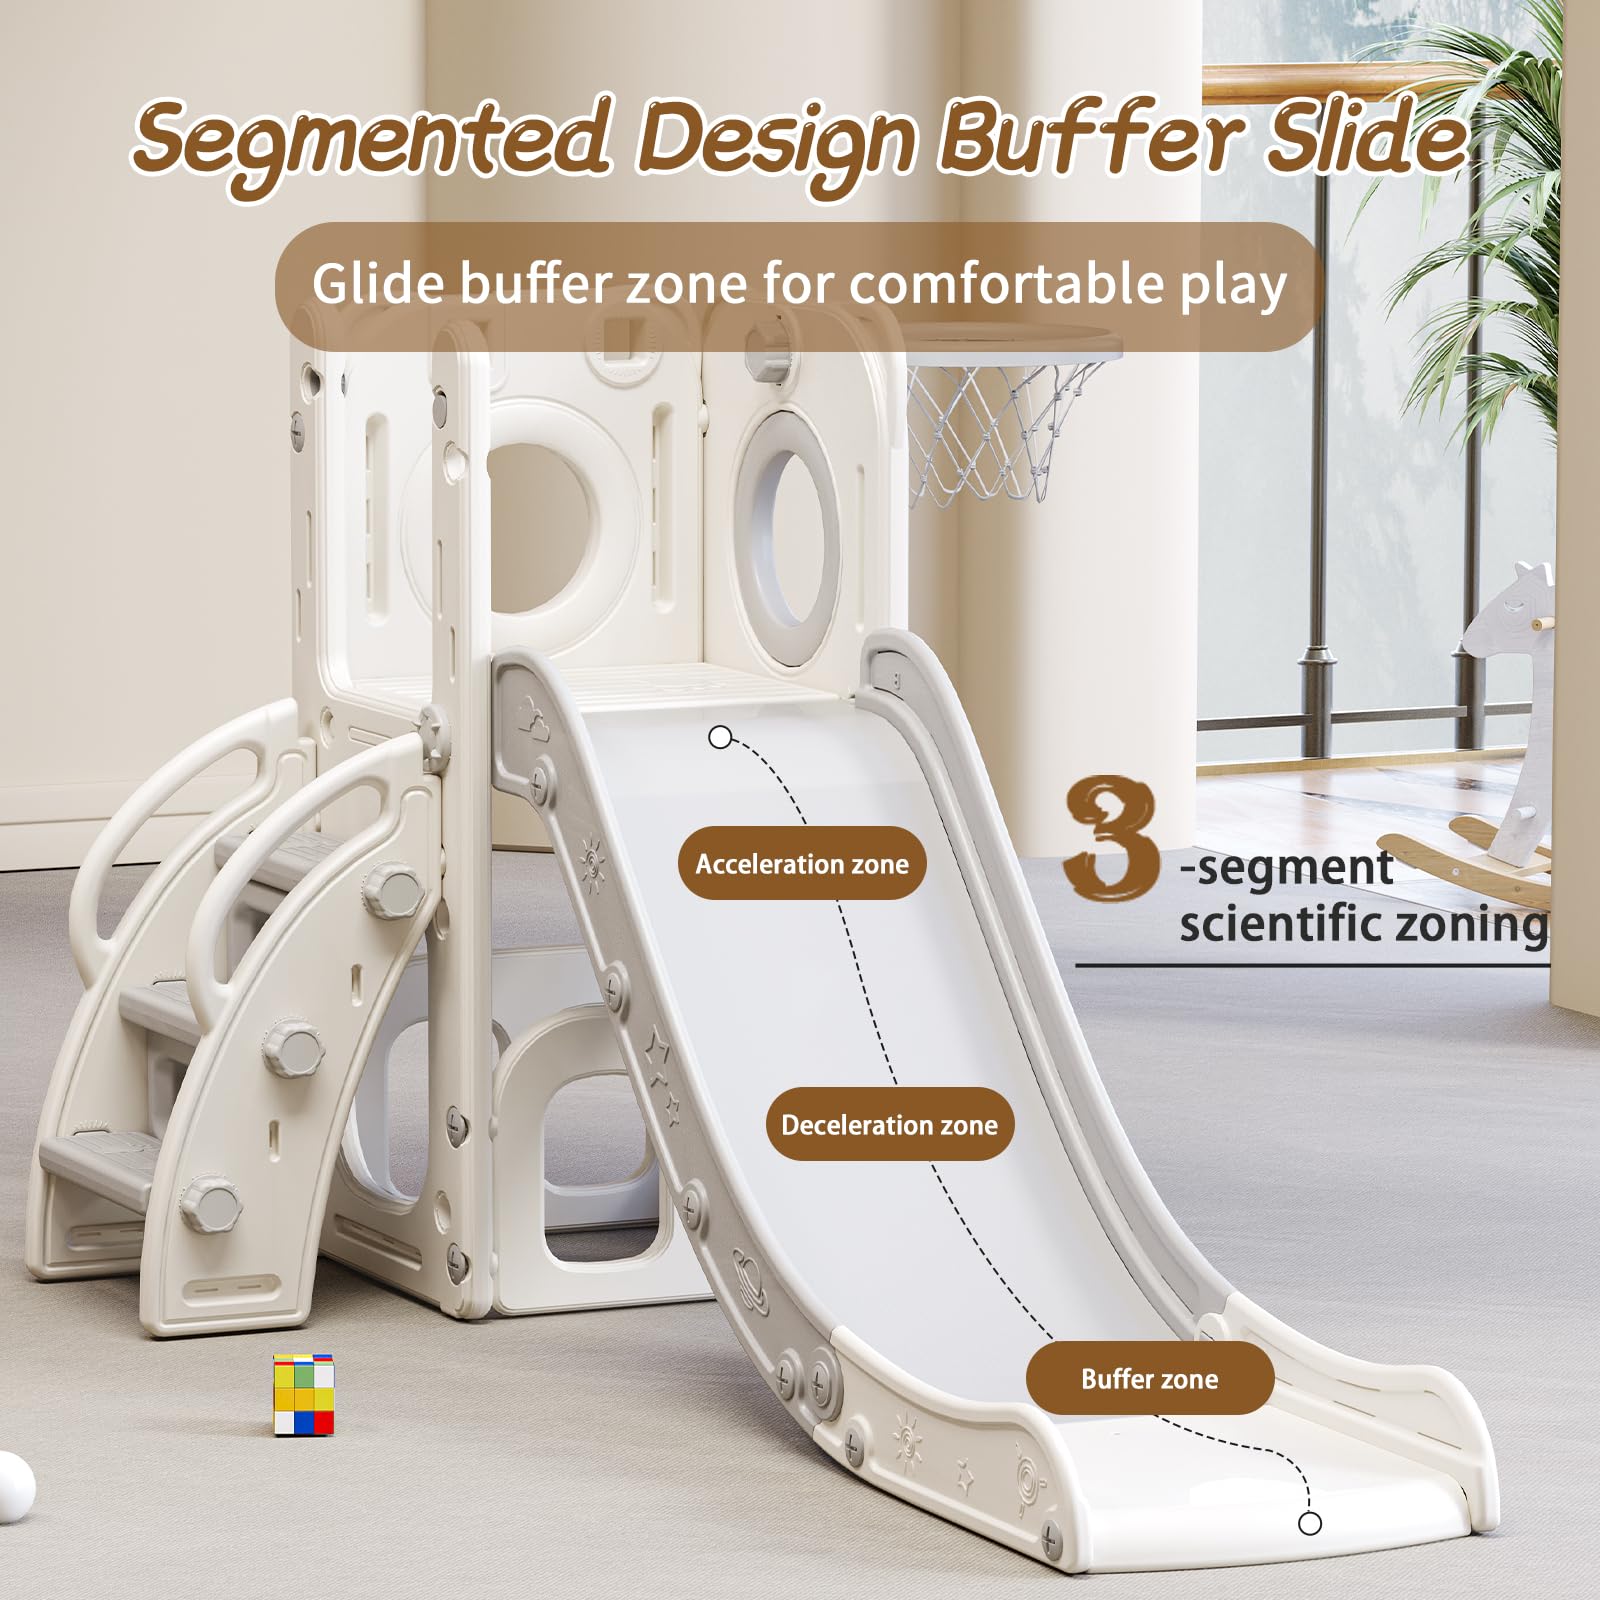 YUYUE 7 in 1 Toddler Slide for Toddlers Age 1-3, Extra-Long Slide with Basketball Hoop Indoor and Outdoor Baby Climber Playset Playground Freestanding Slide (White+Grey)